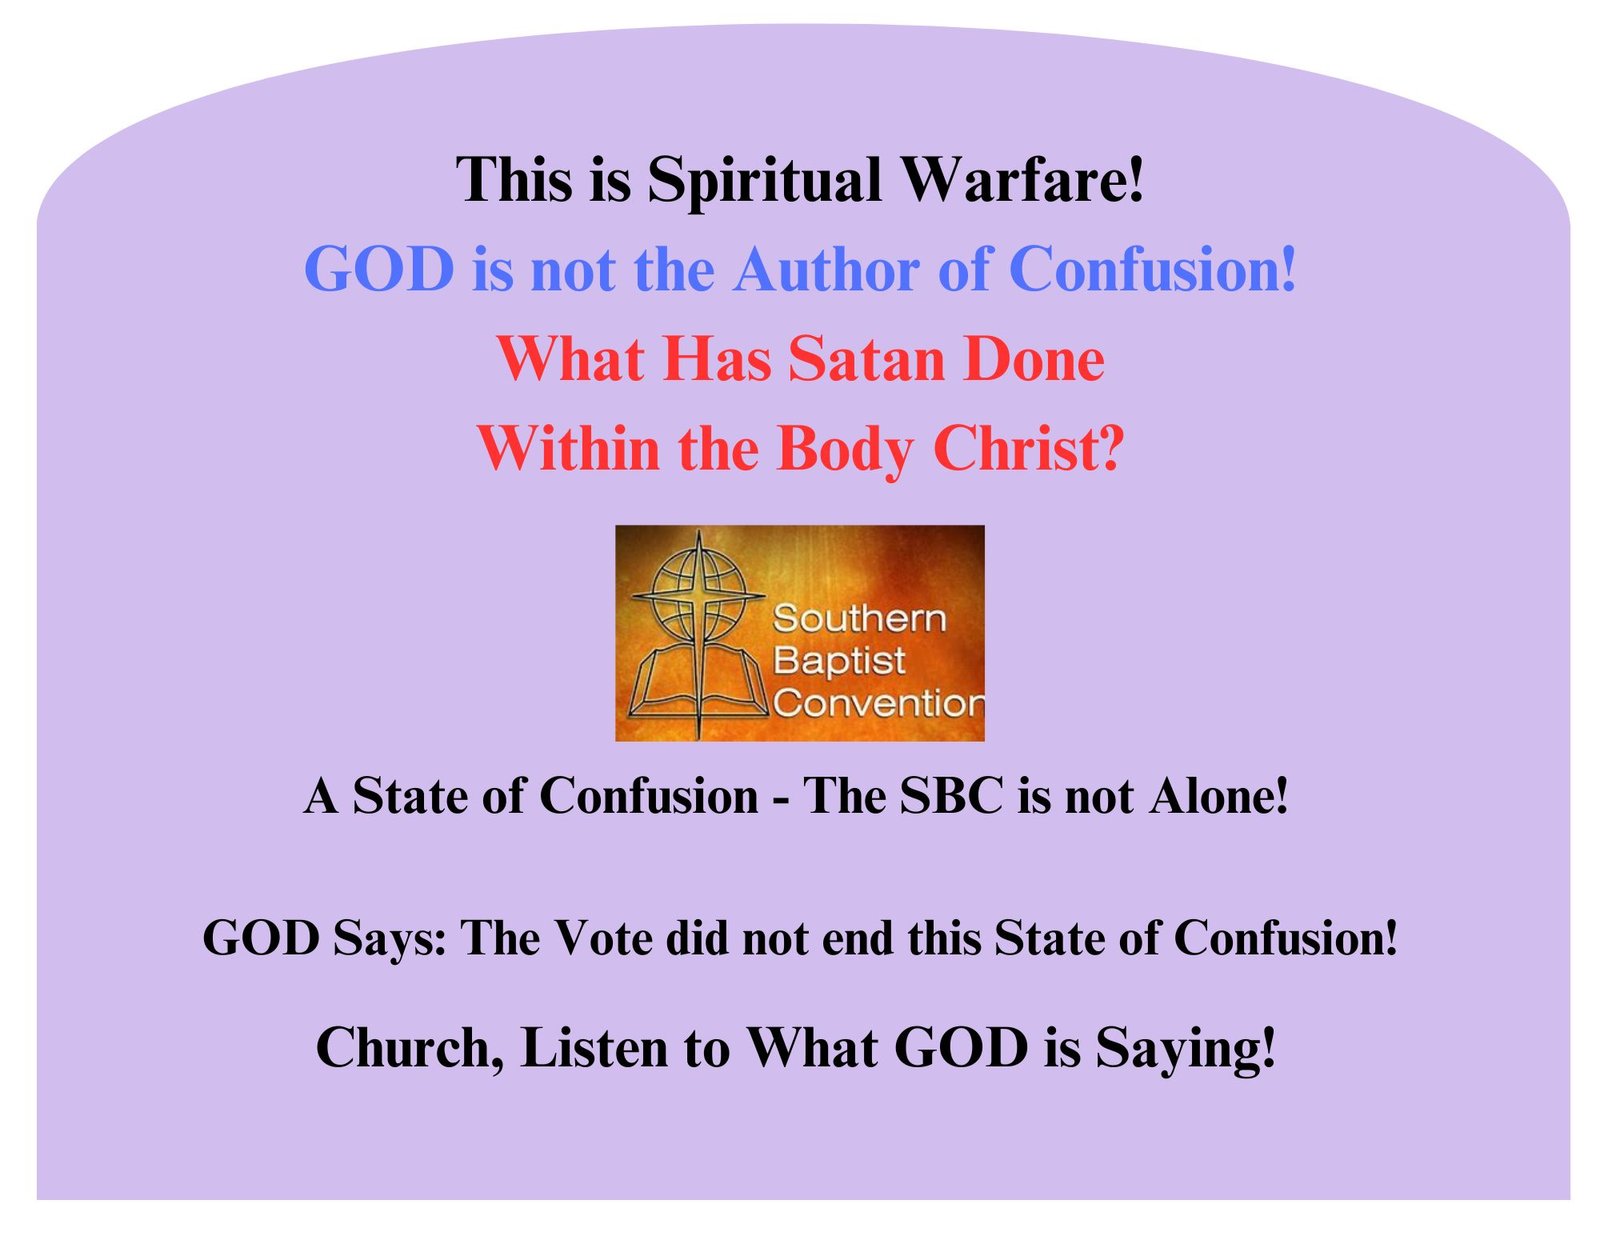 GOD is not the Author of Confusion - SBC Vote did not End the State of Confusion: What Has Satan Done